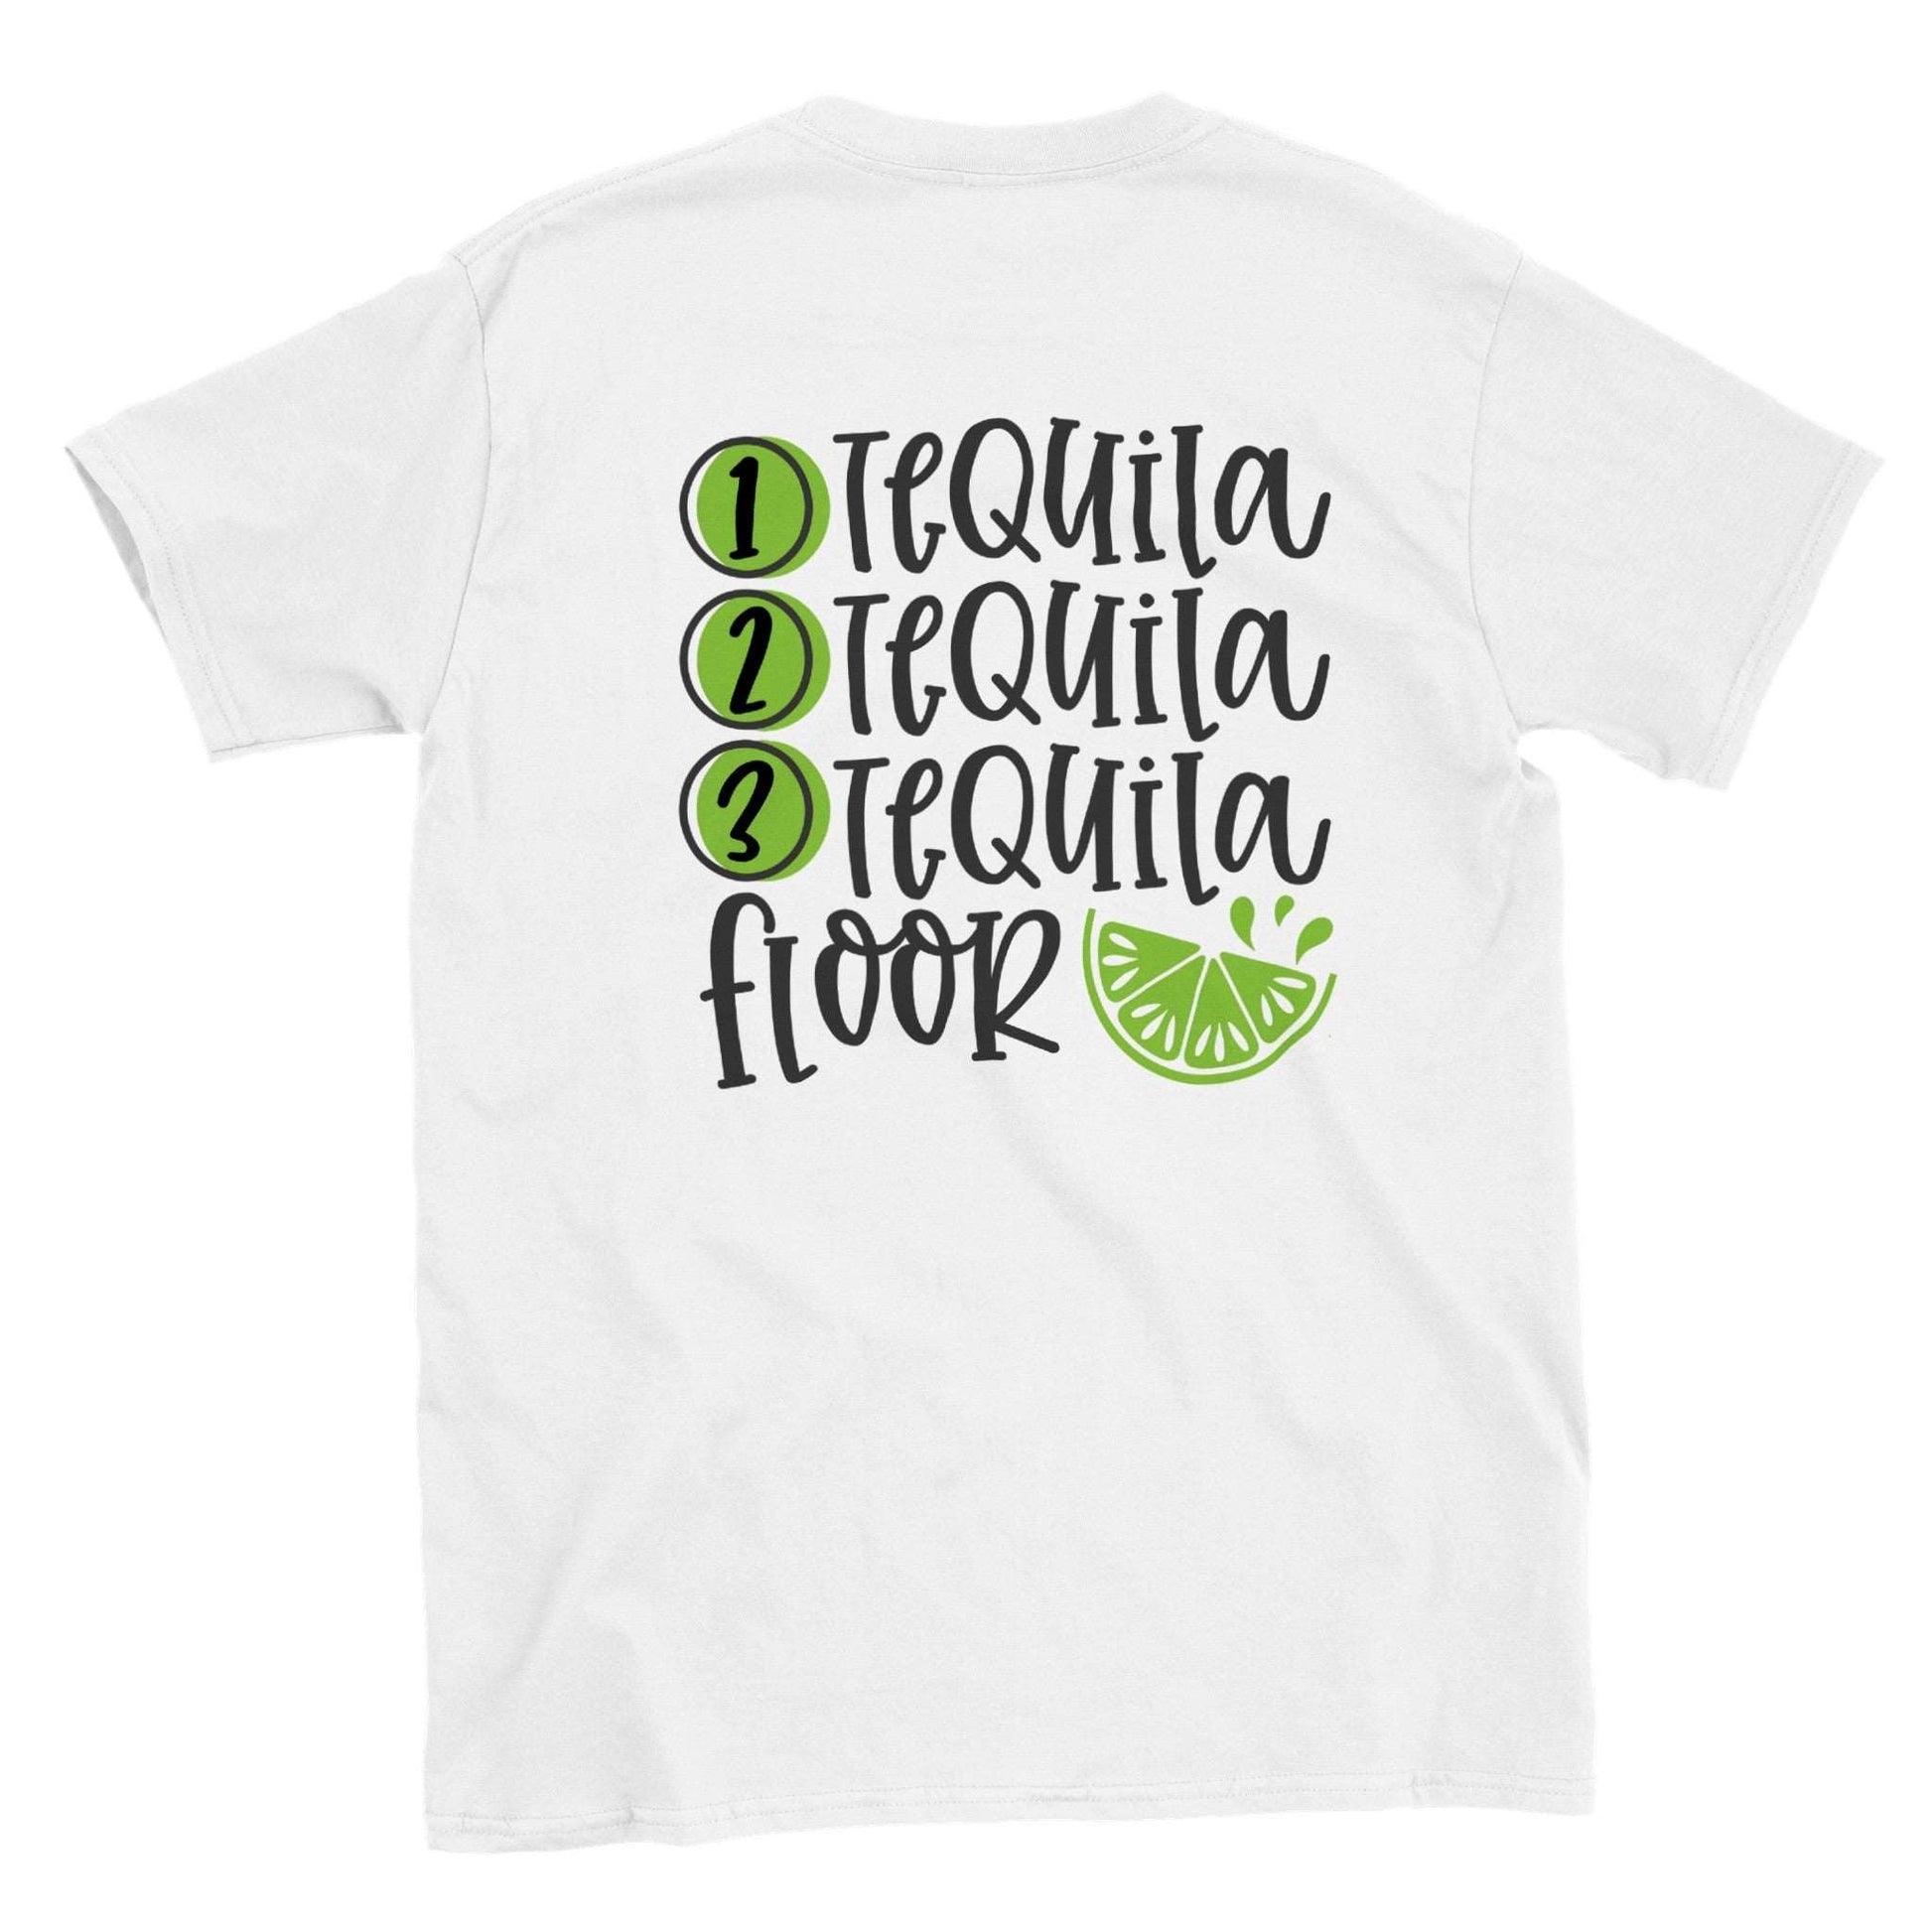 1 Tequila, 2 Tequila, 3 Tequila Floor T-shirt - Mister Snarky's